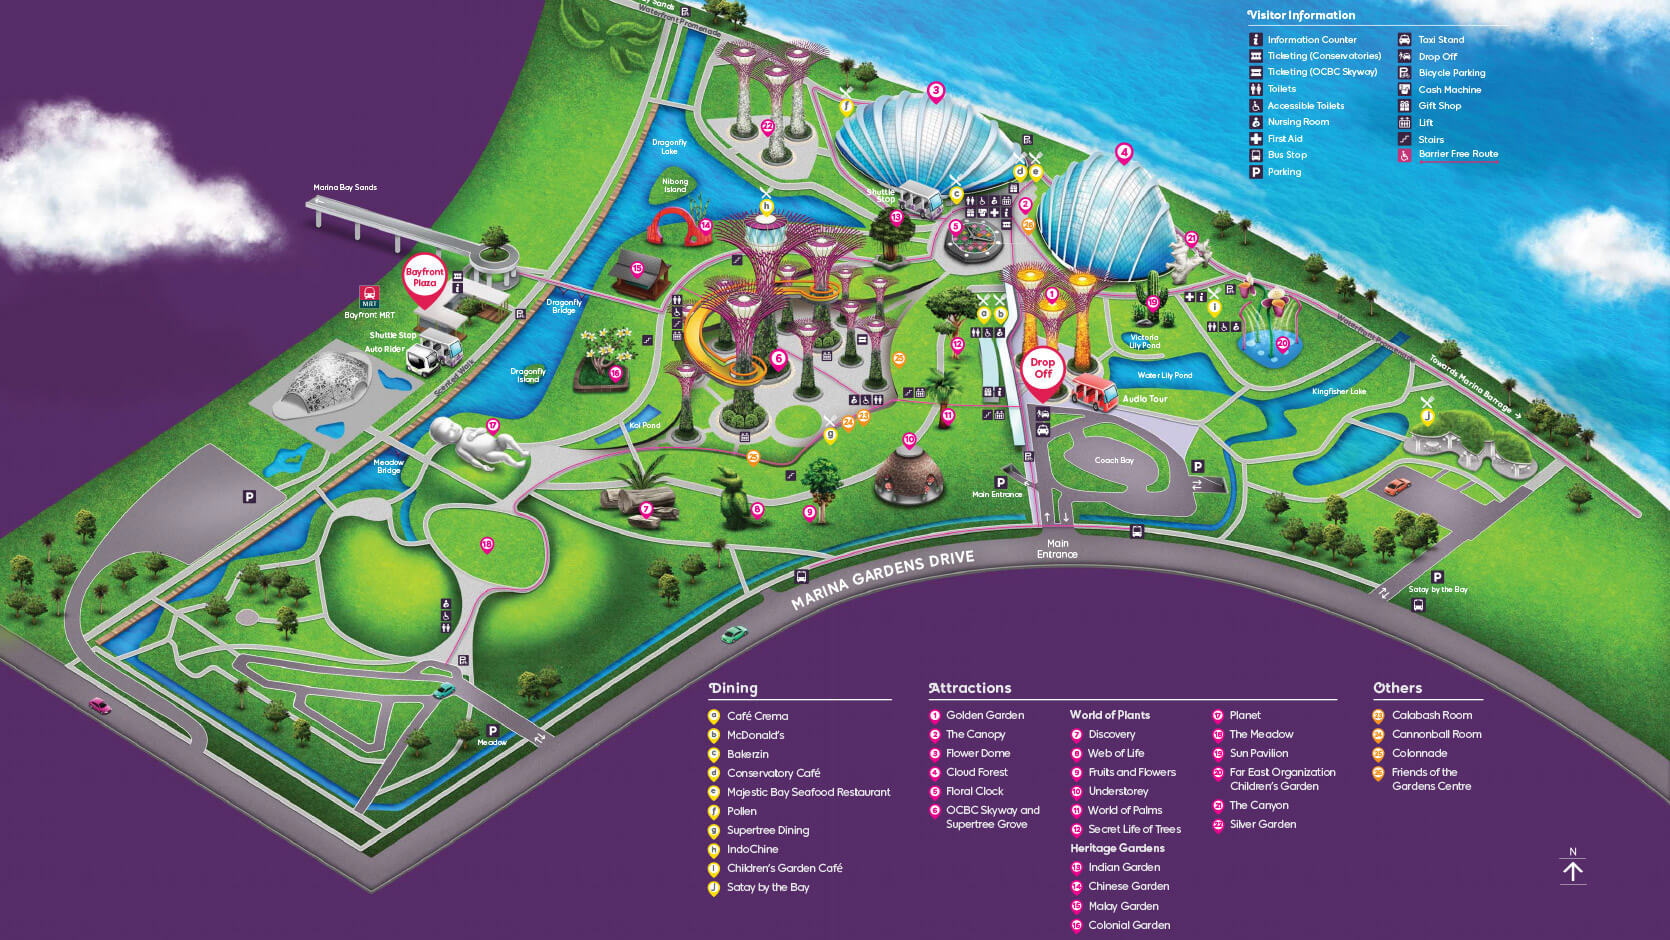 Plan Gardens by the Bay Singapour